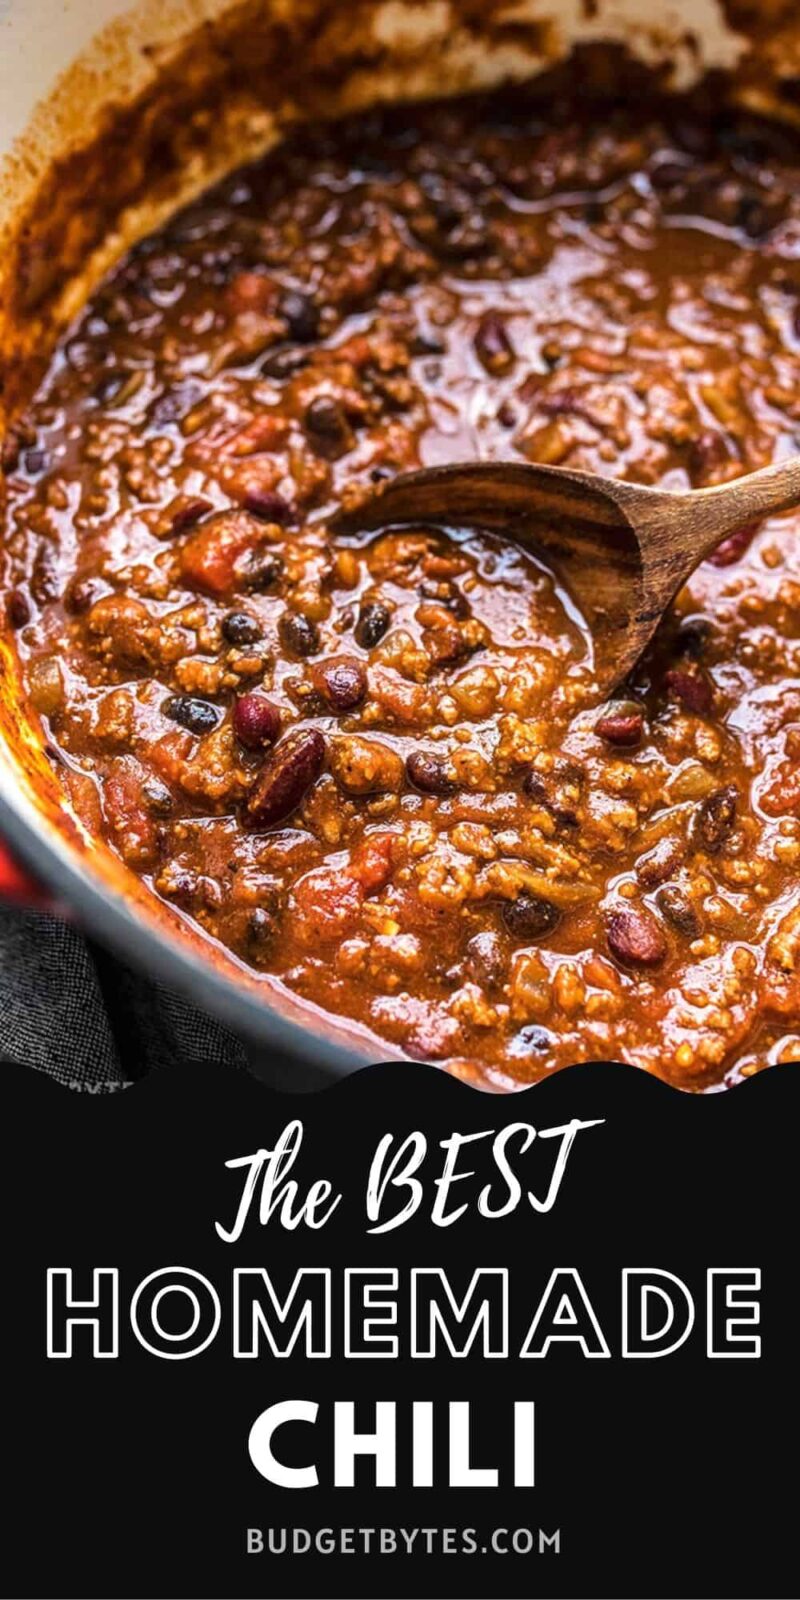 Close up of a pot of chili, title text at the bottom